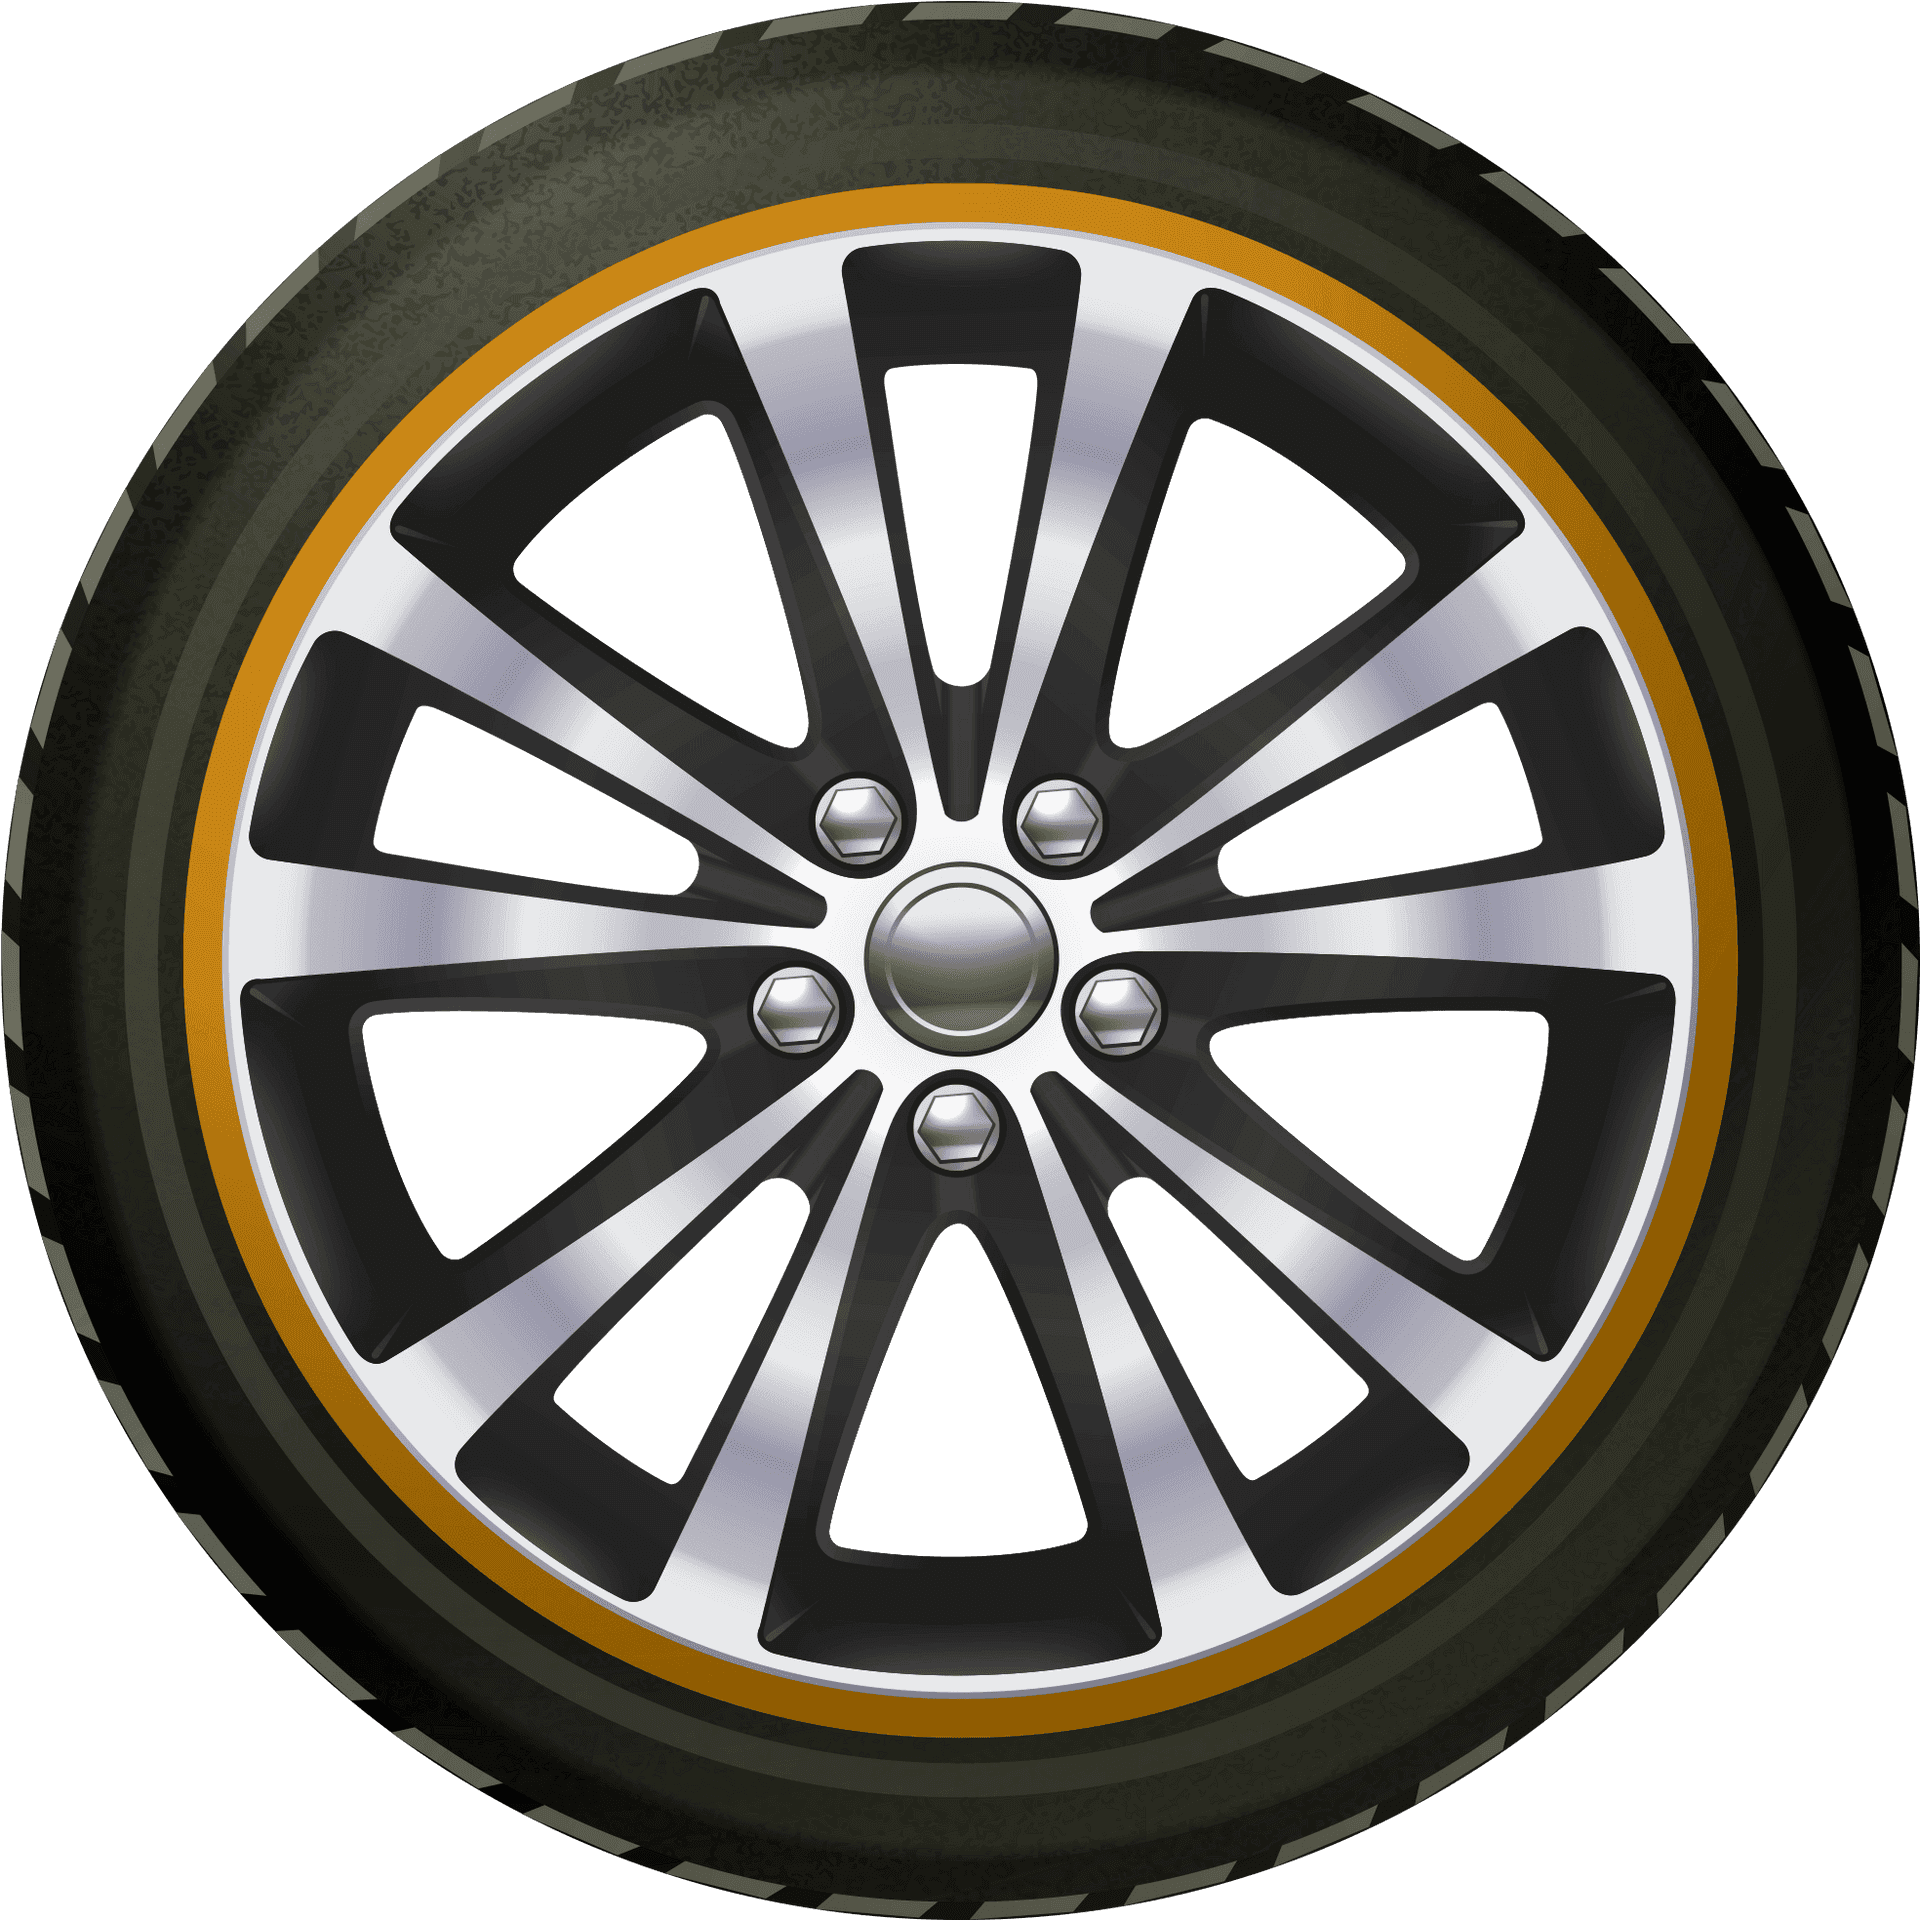 Modern Alloy Wheeland Tire PNG image